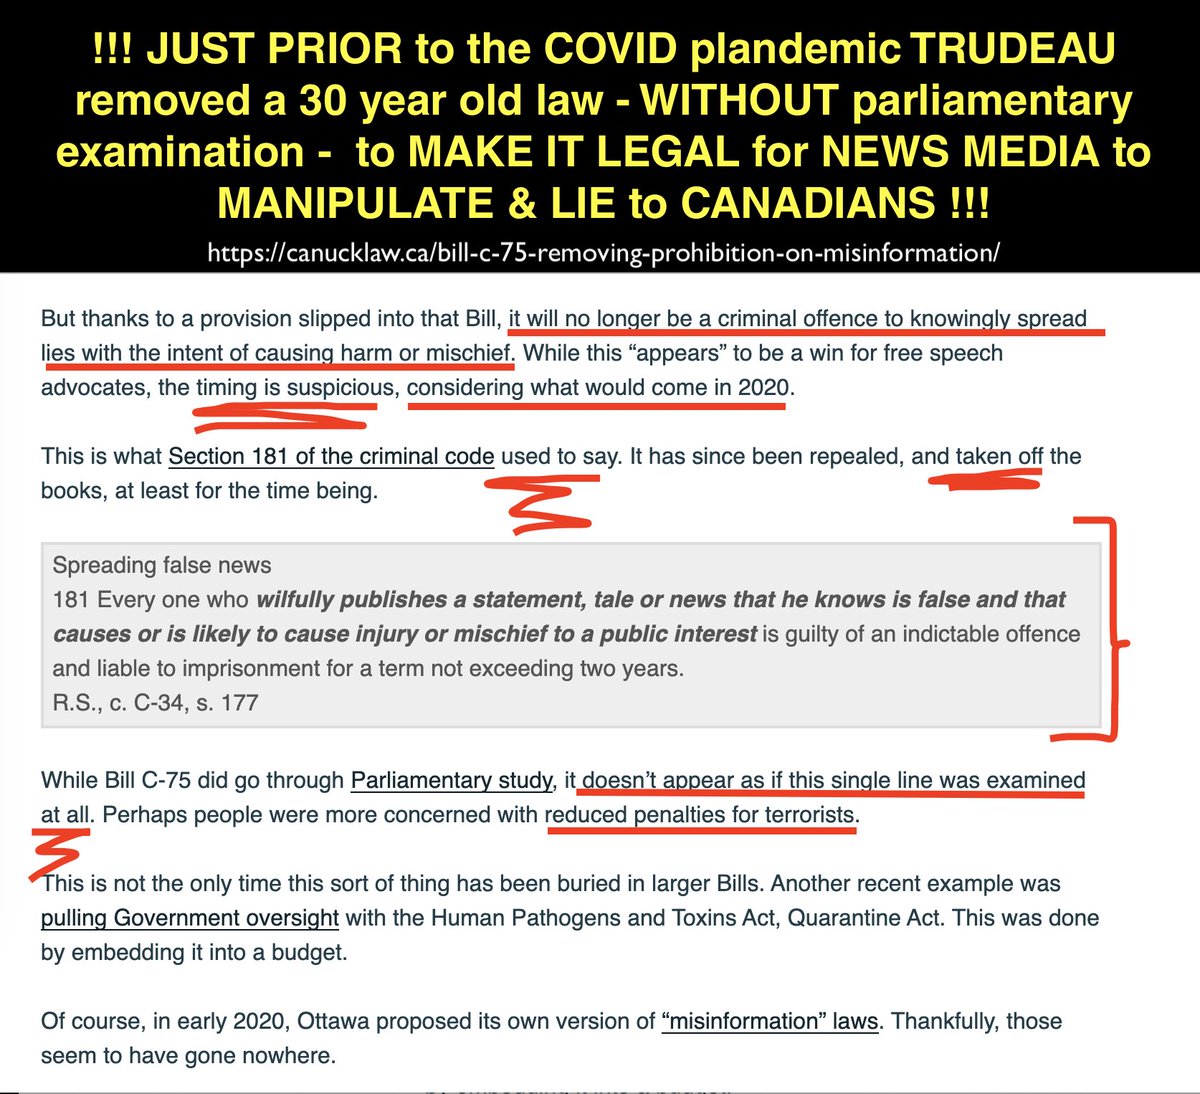 @LarryBrockMP ALSO Trudeau REMOVED the 30-year-old LAW that held media accountable for lies/disinformation just BEFORE his Covid fraud!!
He then BRIBED media with OUR $$$ to spew his SCRIPT?
HOW THE FUCK IS THIS NOT CONSIDERED ELECTION INTERFERENCE?
 @EPIEPIFI is as corrupt as he is